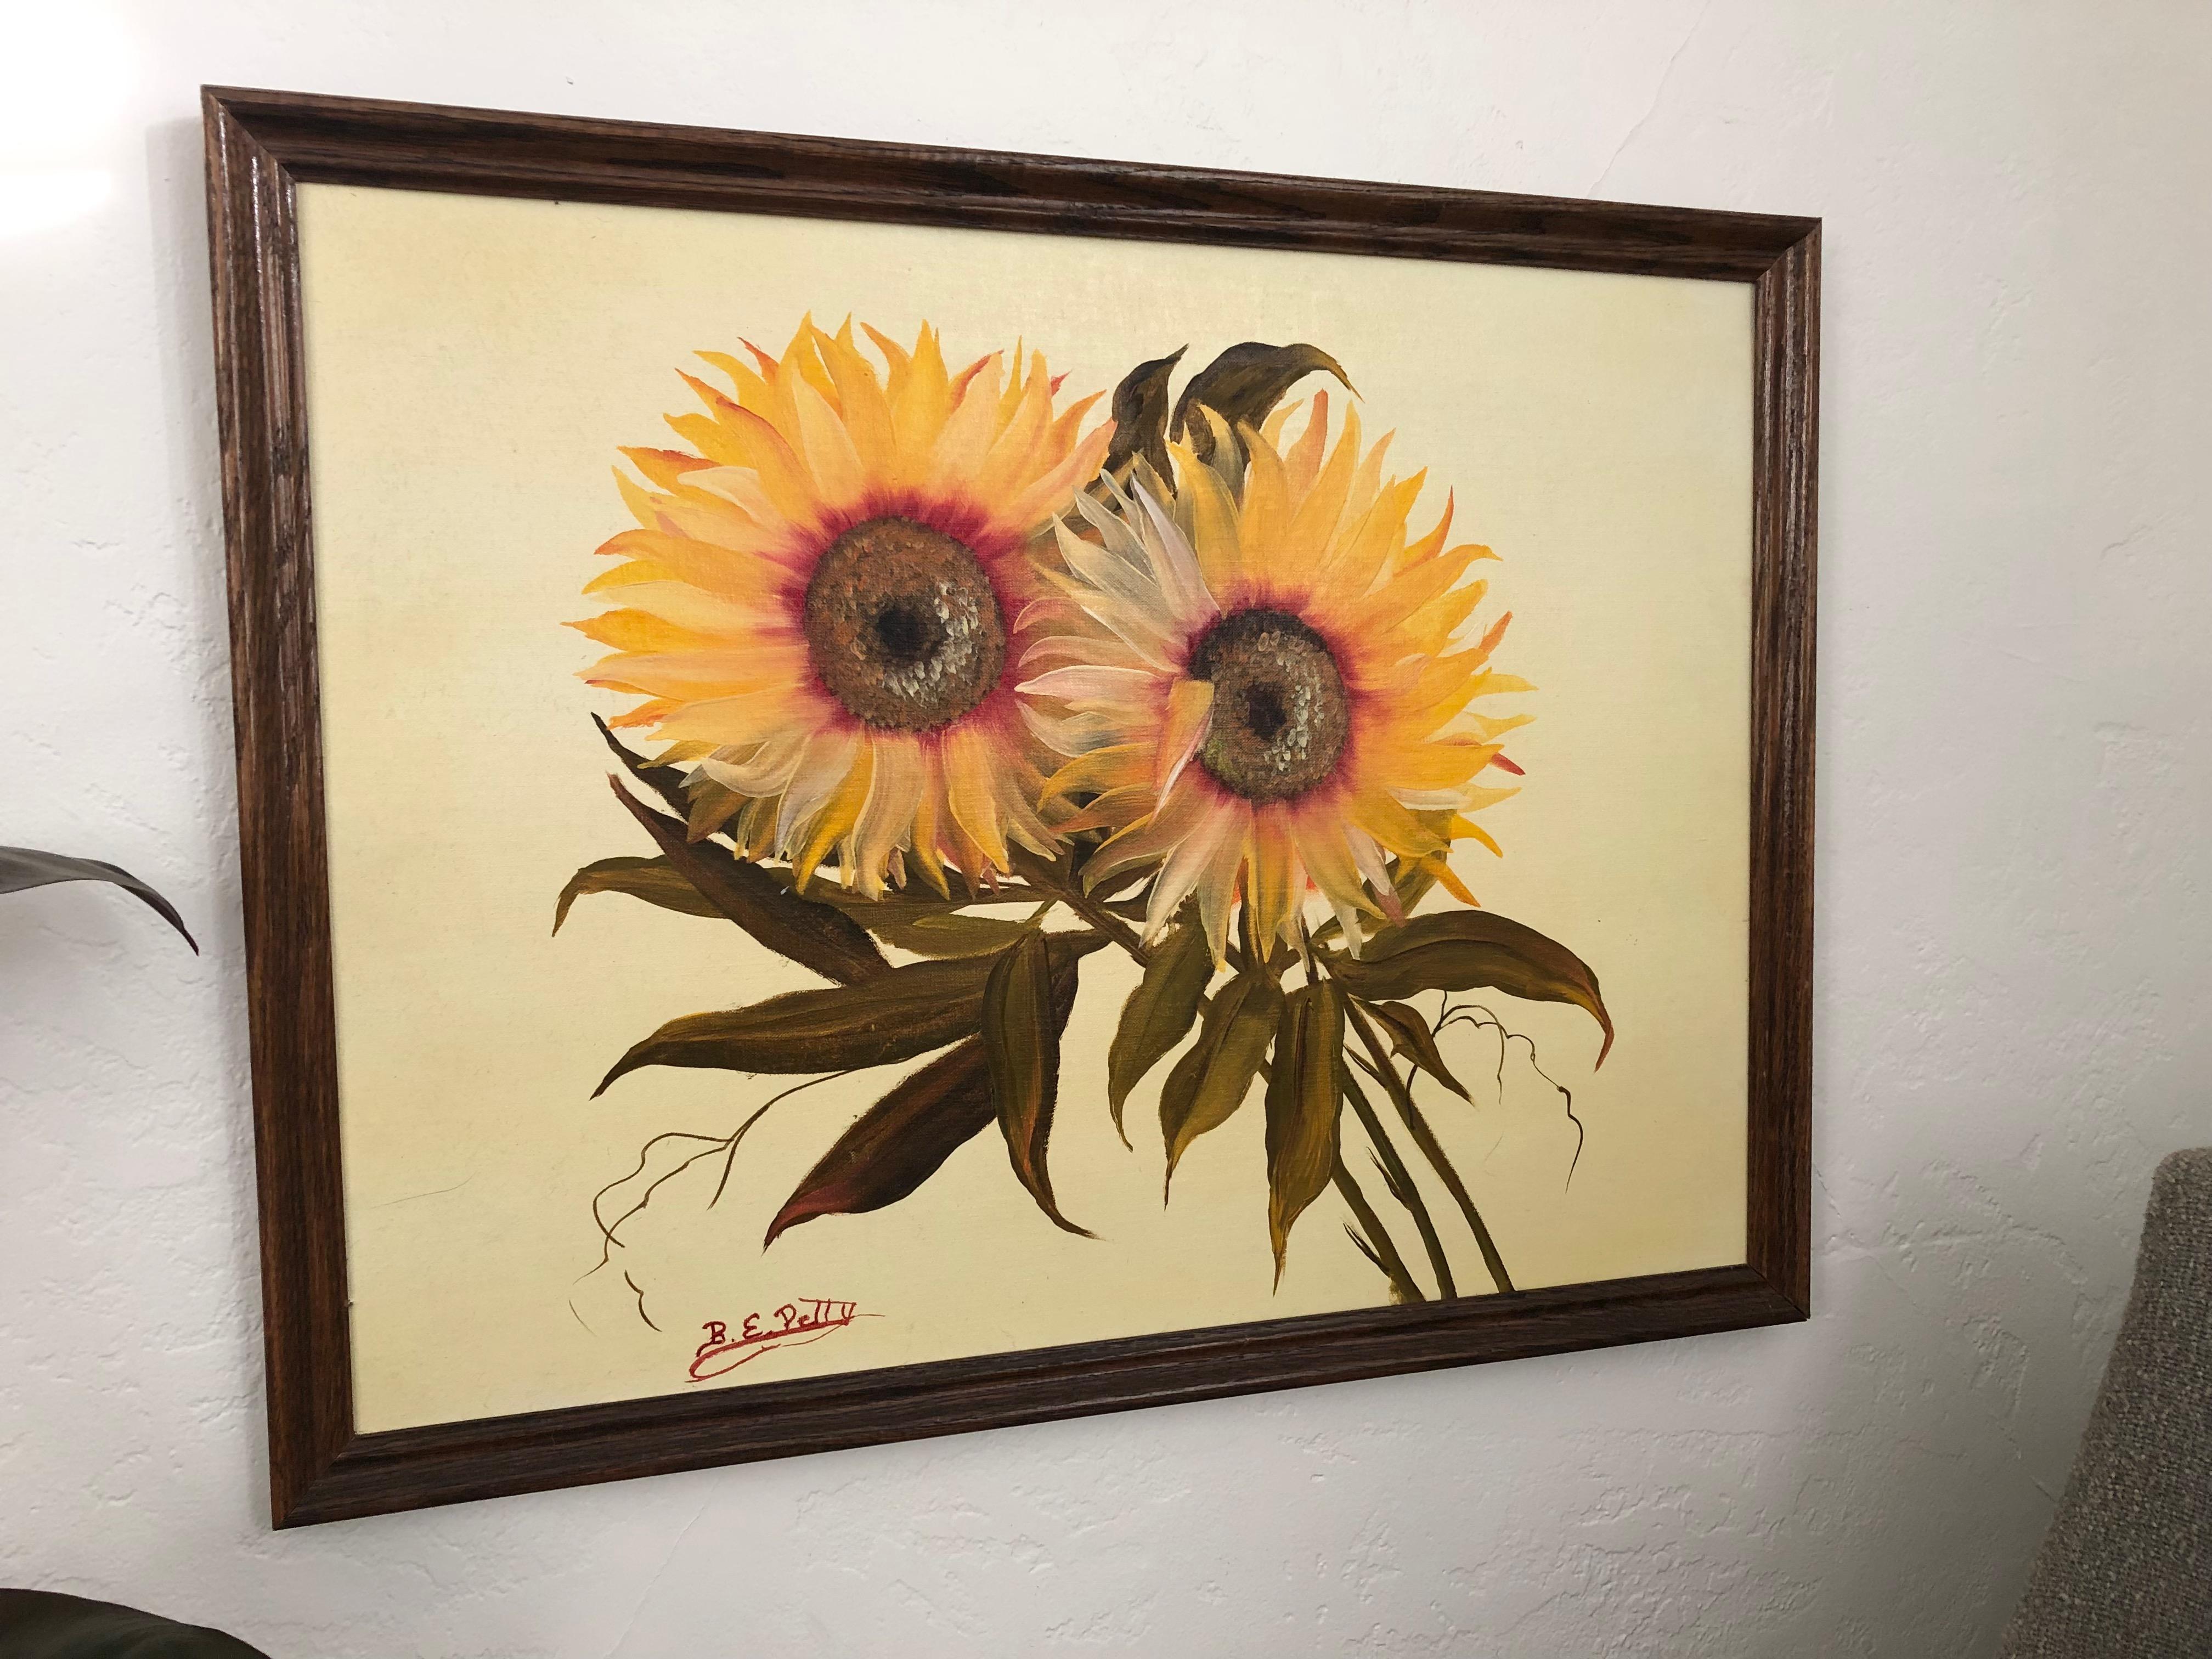 American Classical Vintage Sunflower Oil Painting